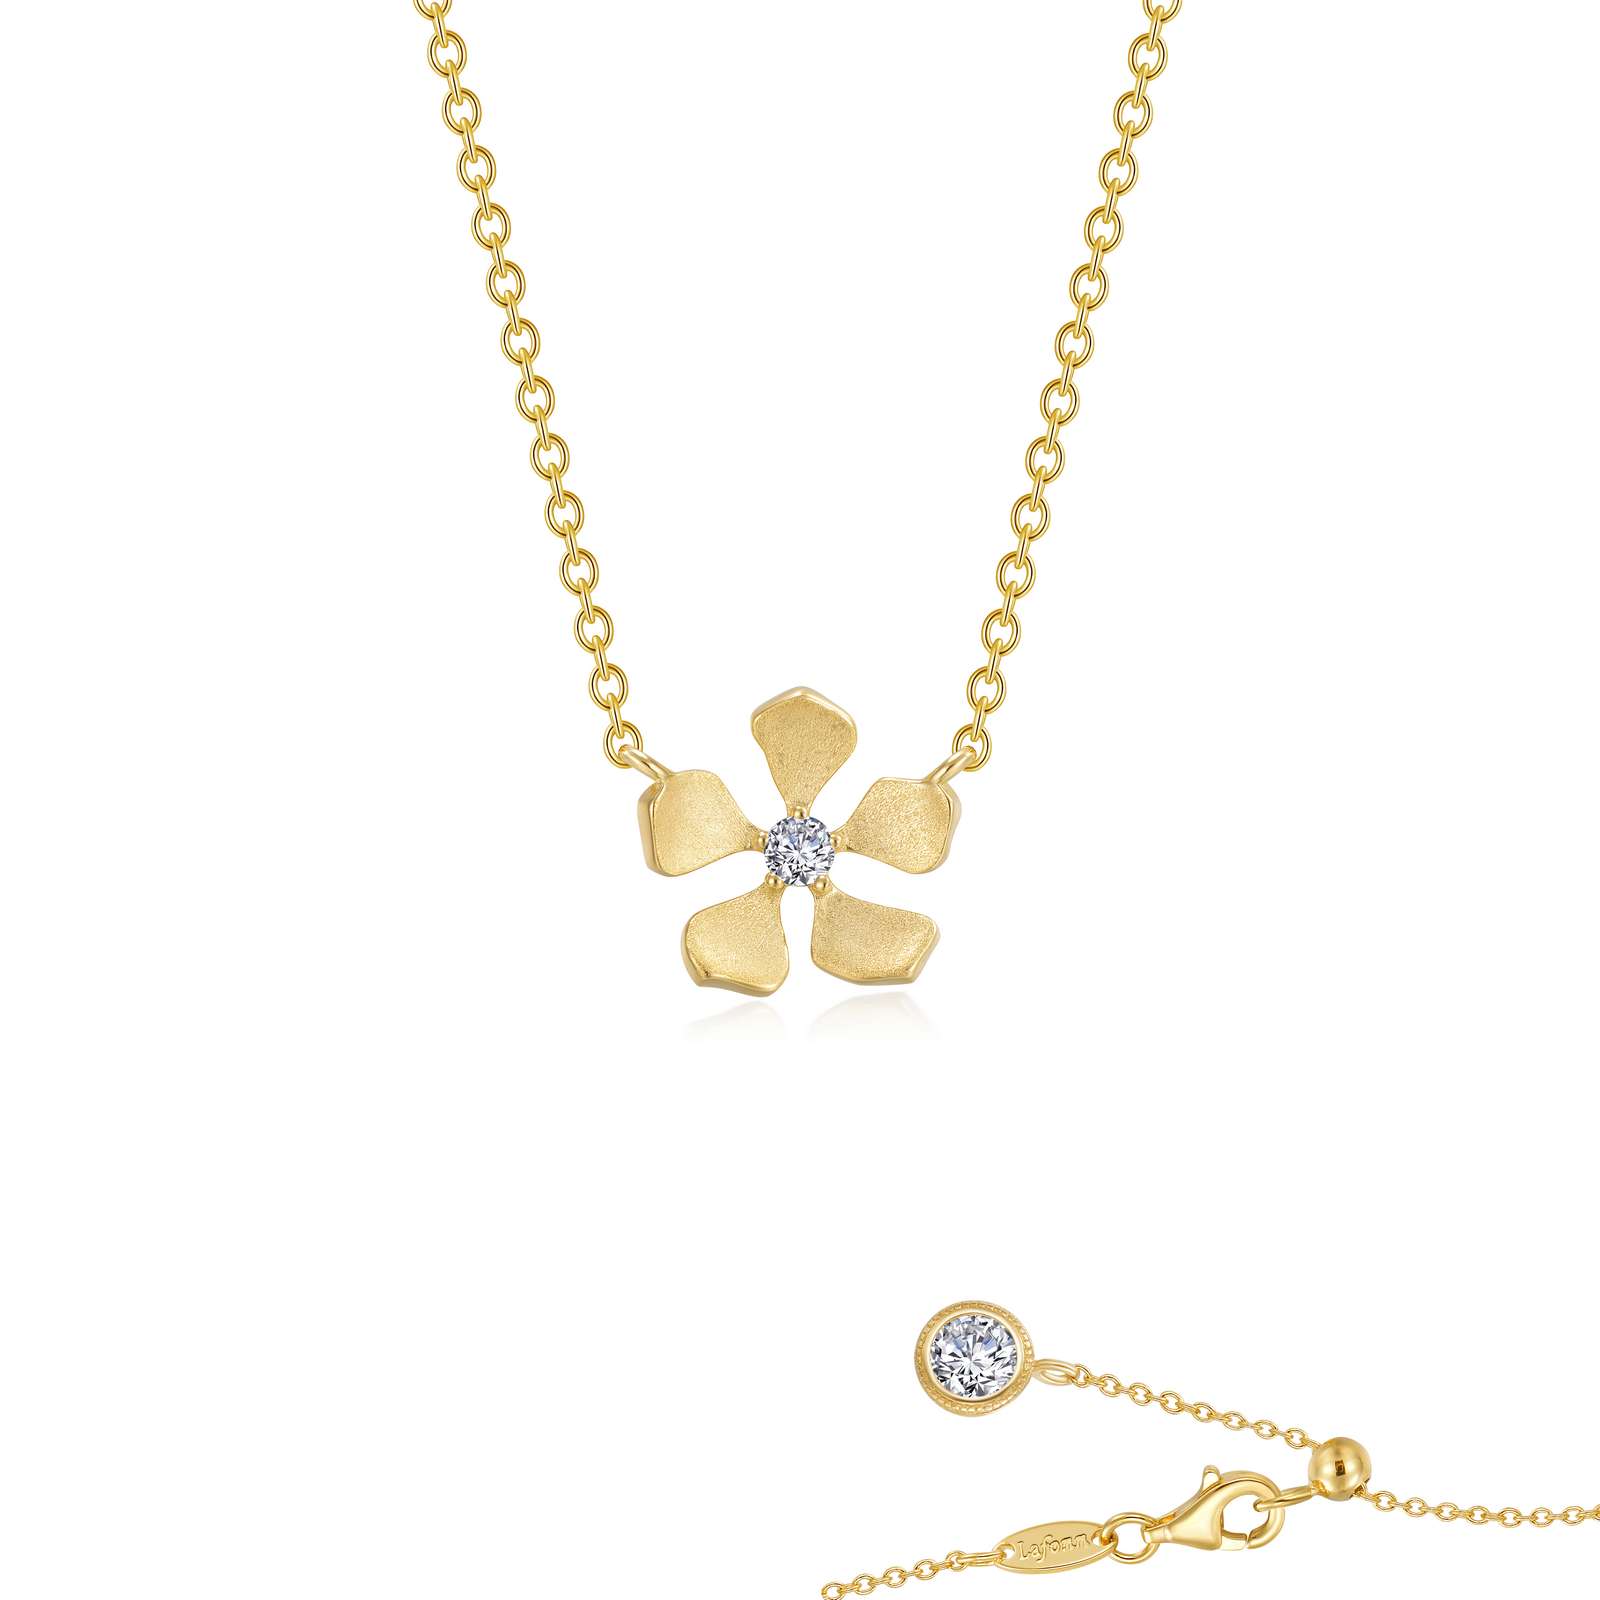 Delicate Flower Necklace Griner Jewelry Co. Moultrie, GA